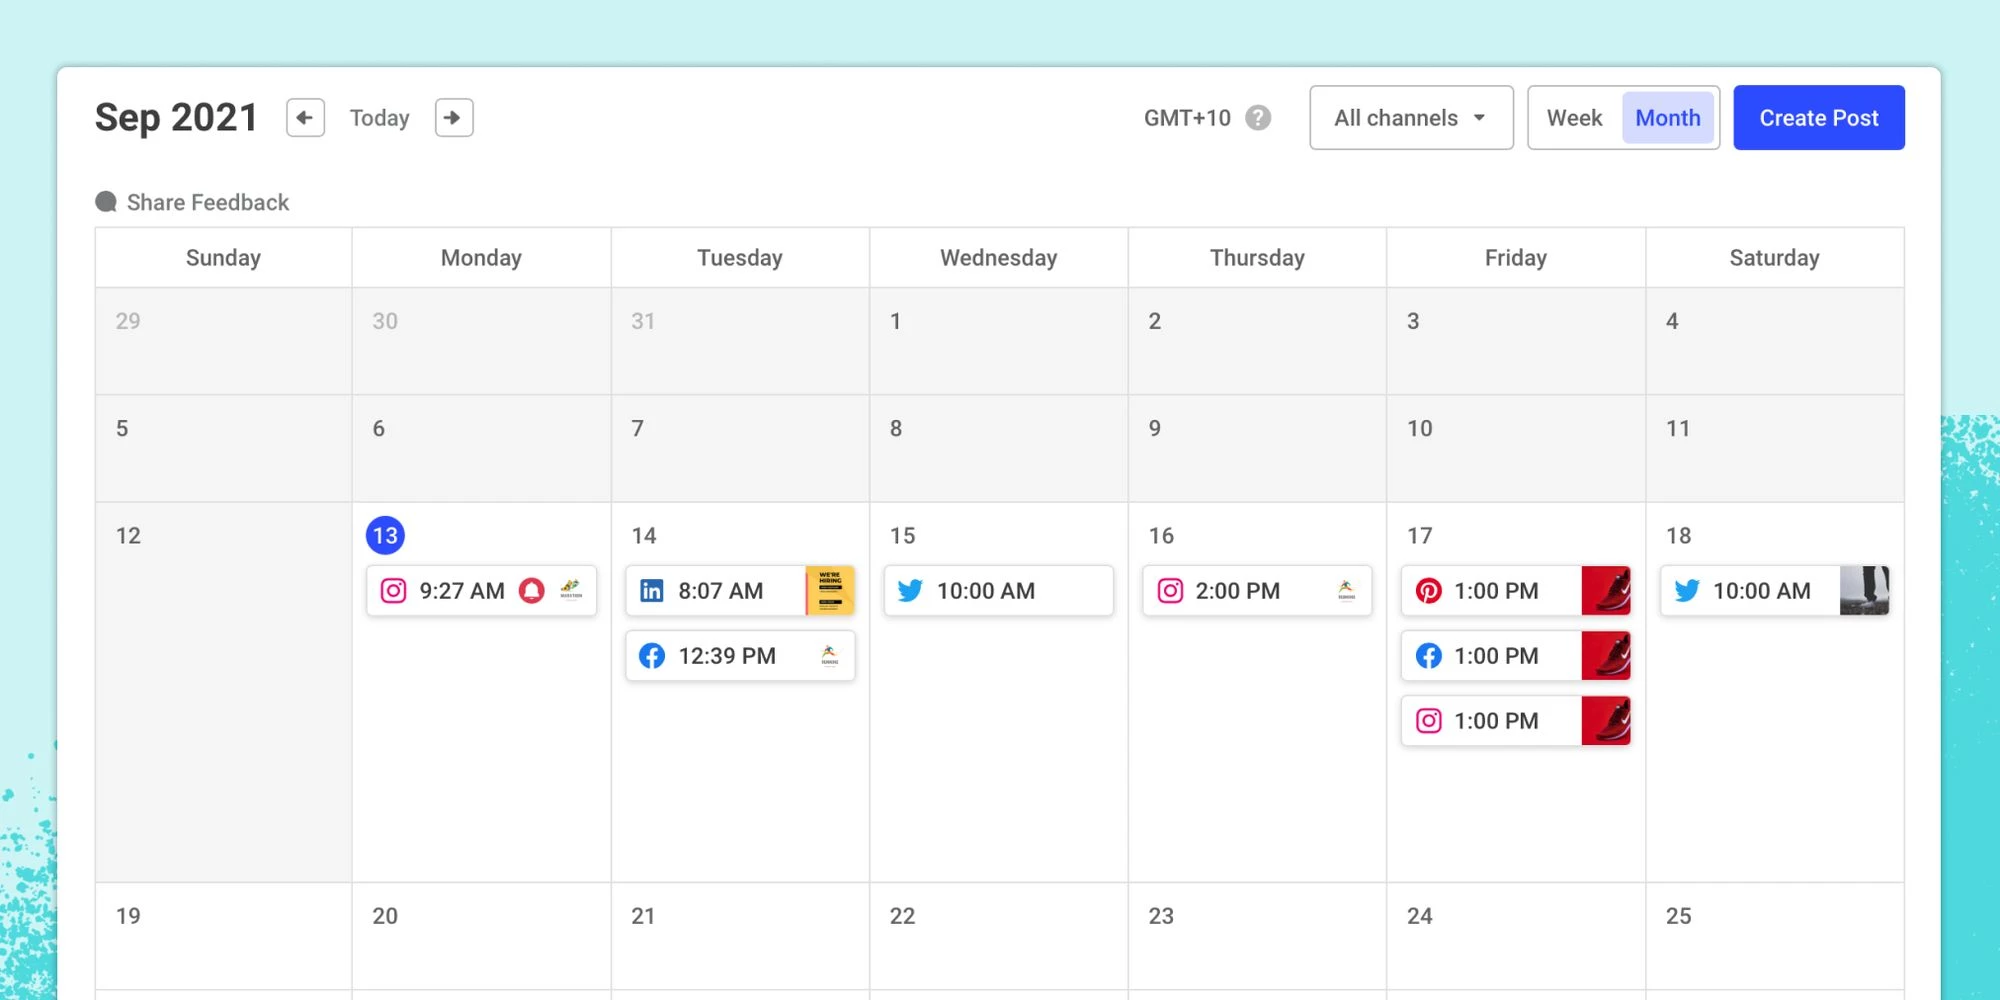 An example of a social media calendar with posts for multiple platforms